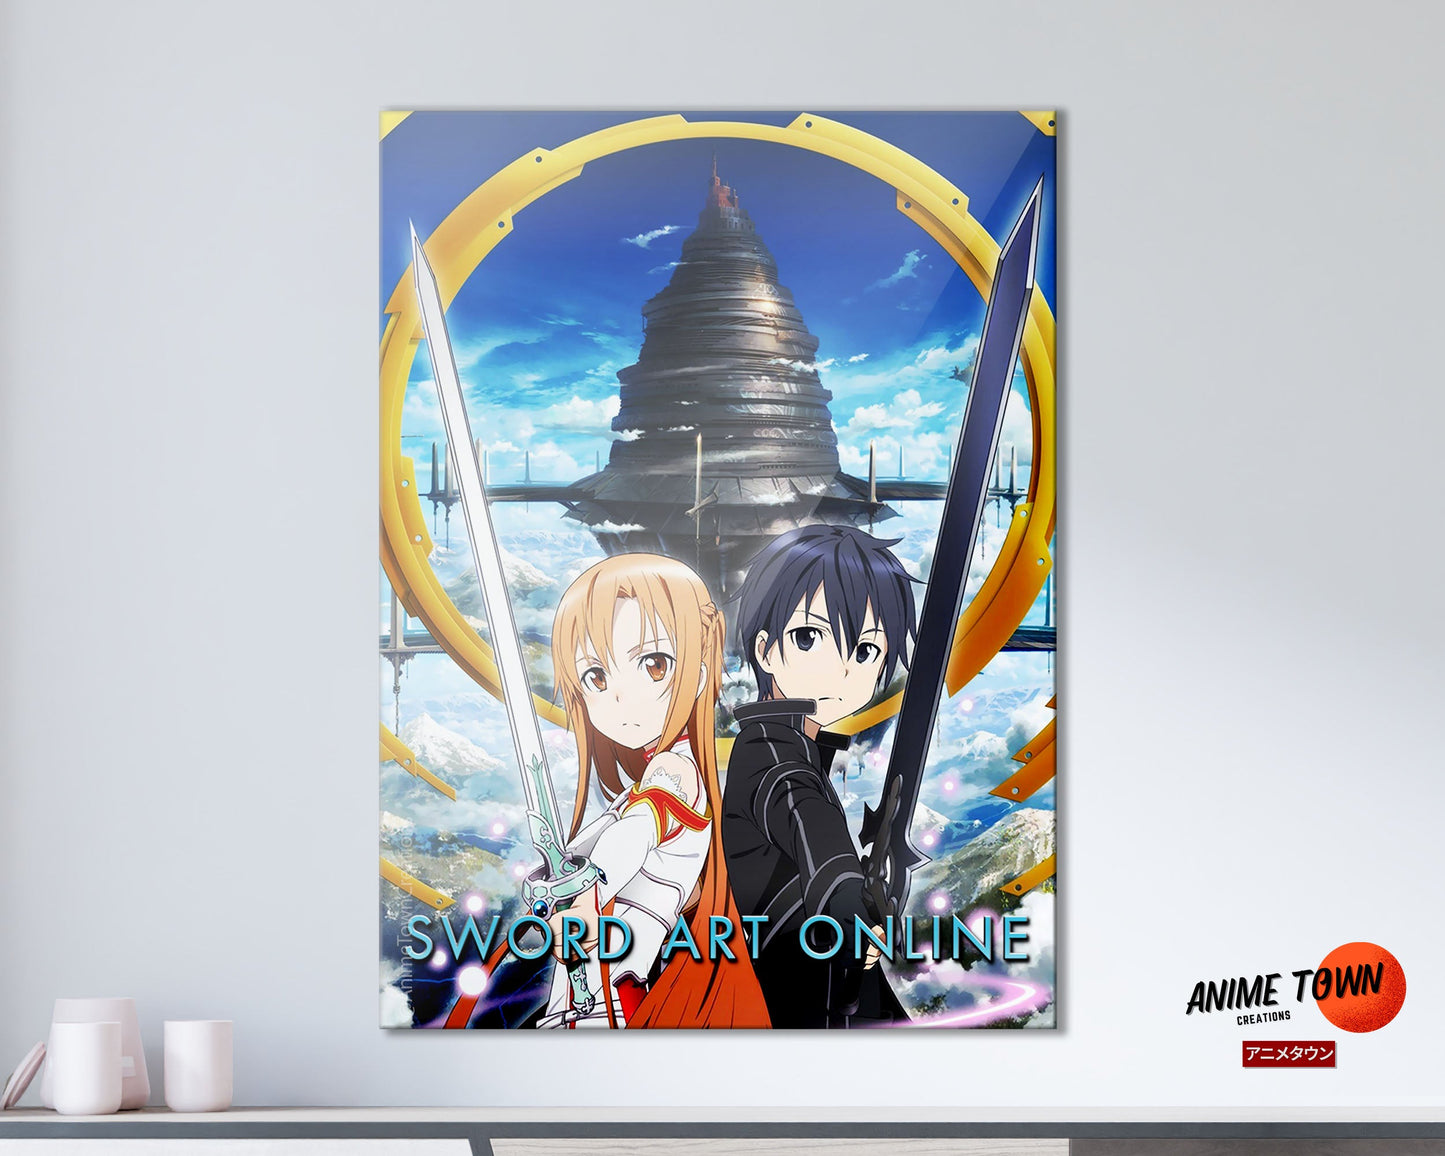 Anime Town Creations Metal Poster Sword Art Online 5" x 7" Home Goods - Anime Spy x Family Metal Poster